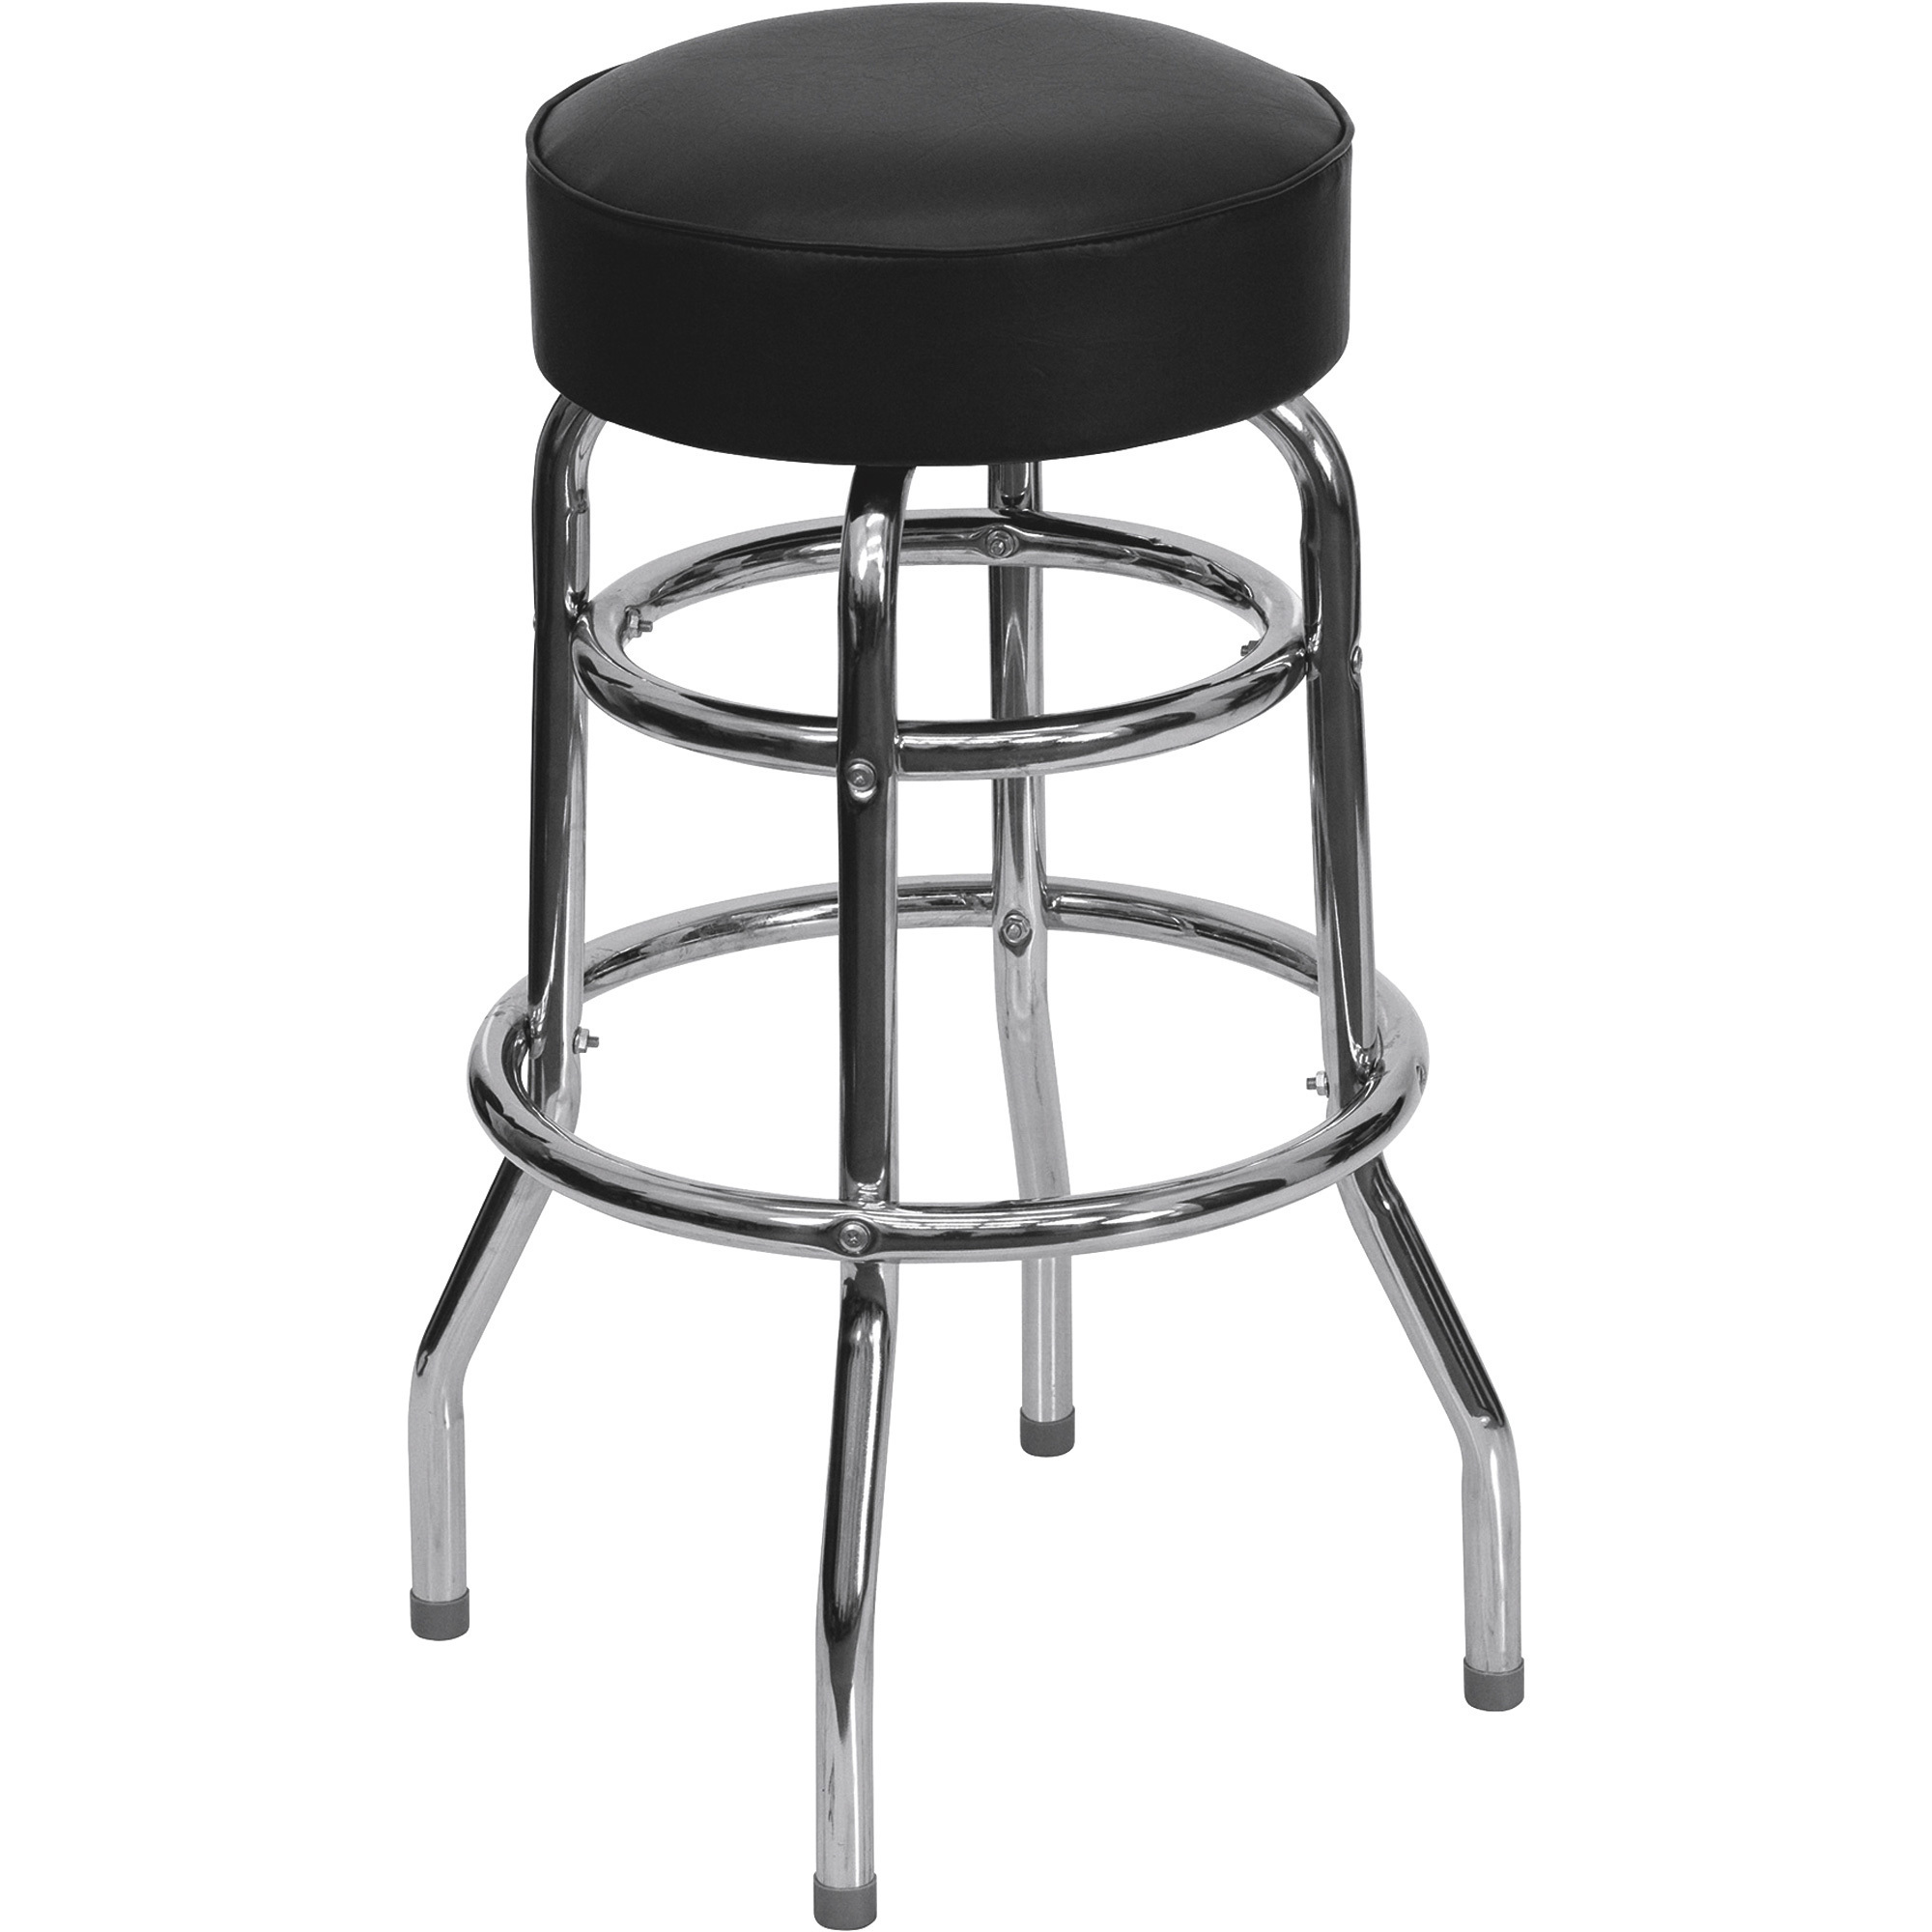 Flash Furniture Double Ring Chrome Bar Stool with Swivel Seat â Black Vinyl Seat, Model XUD100